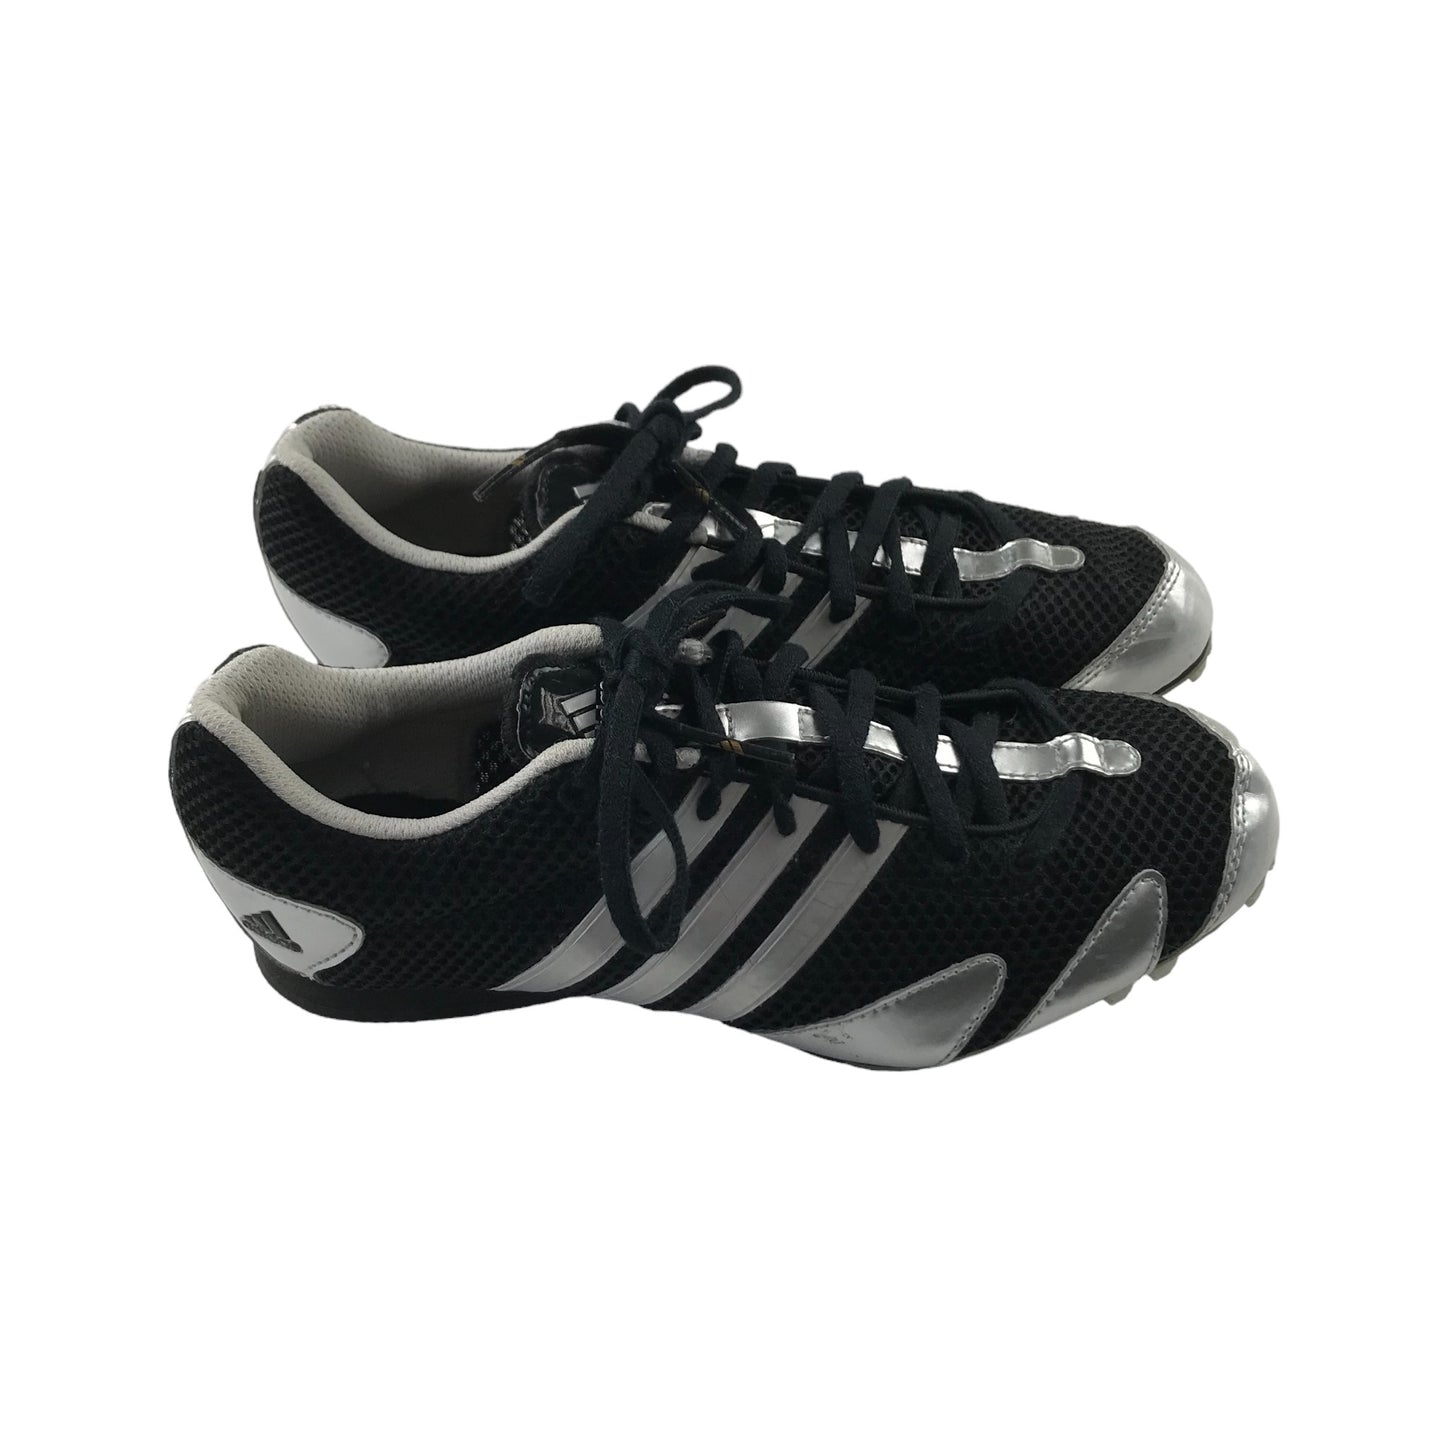 Adidas Track Running Sports Shoes Shoe Size 5.5 Black Silver and White Details Needs replacement Spikes